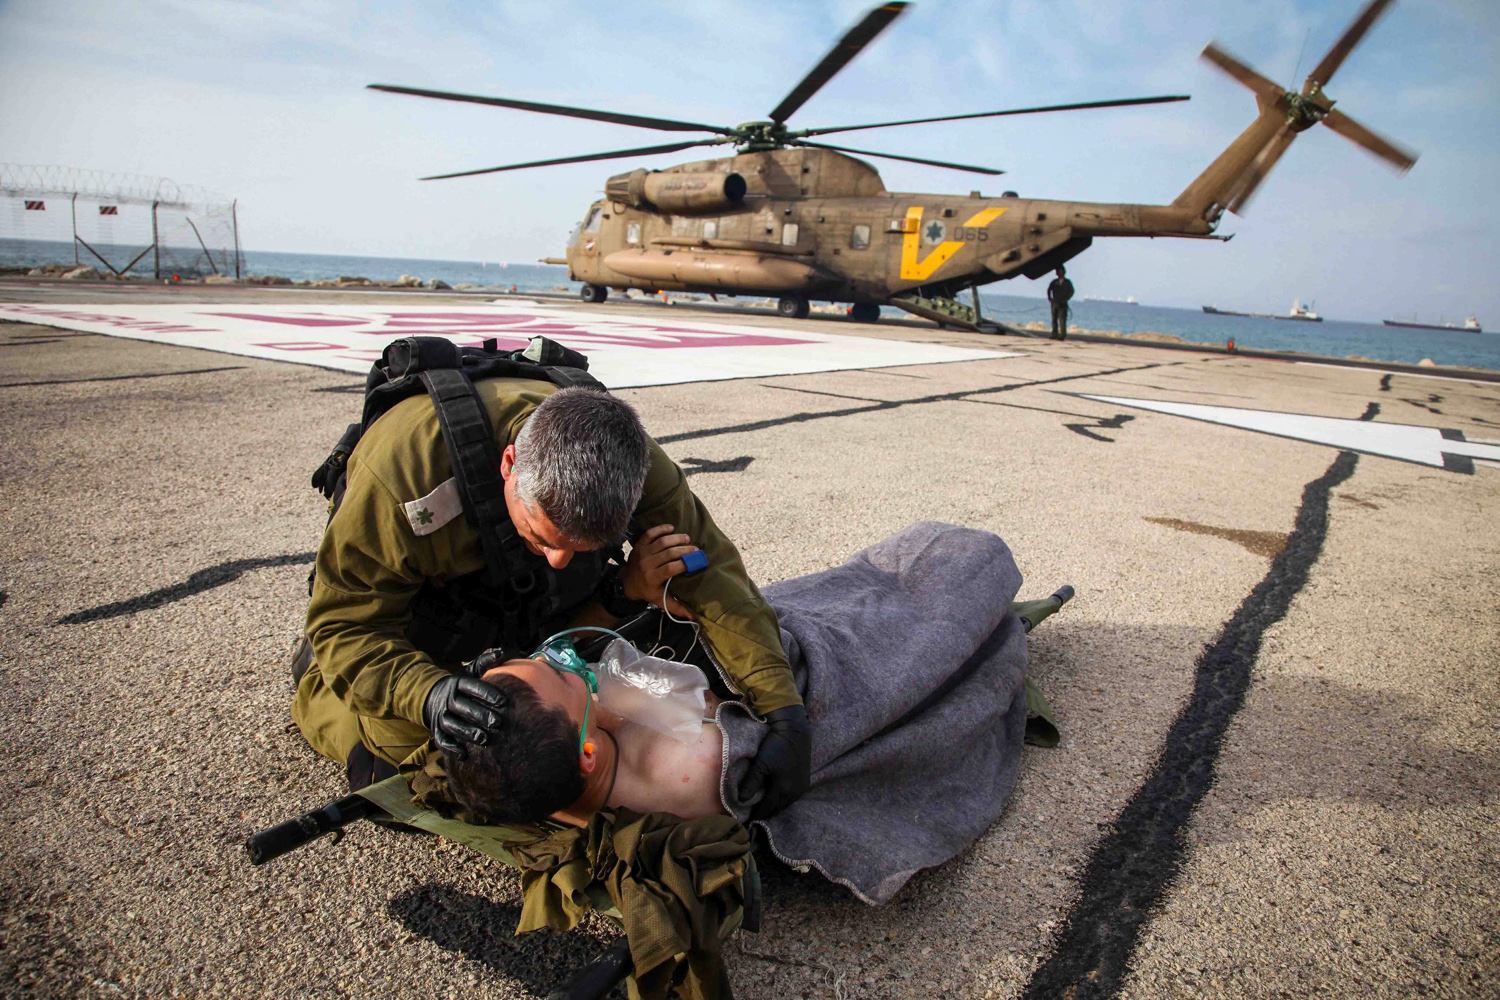 Israeli soldier wounded on Syrian border evacuated to Haifa hospital by helicopter